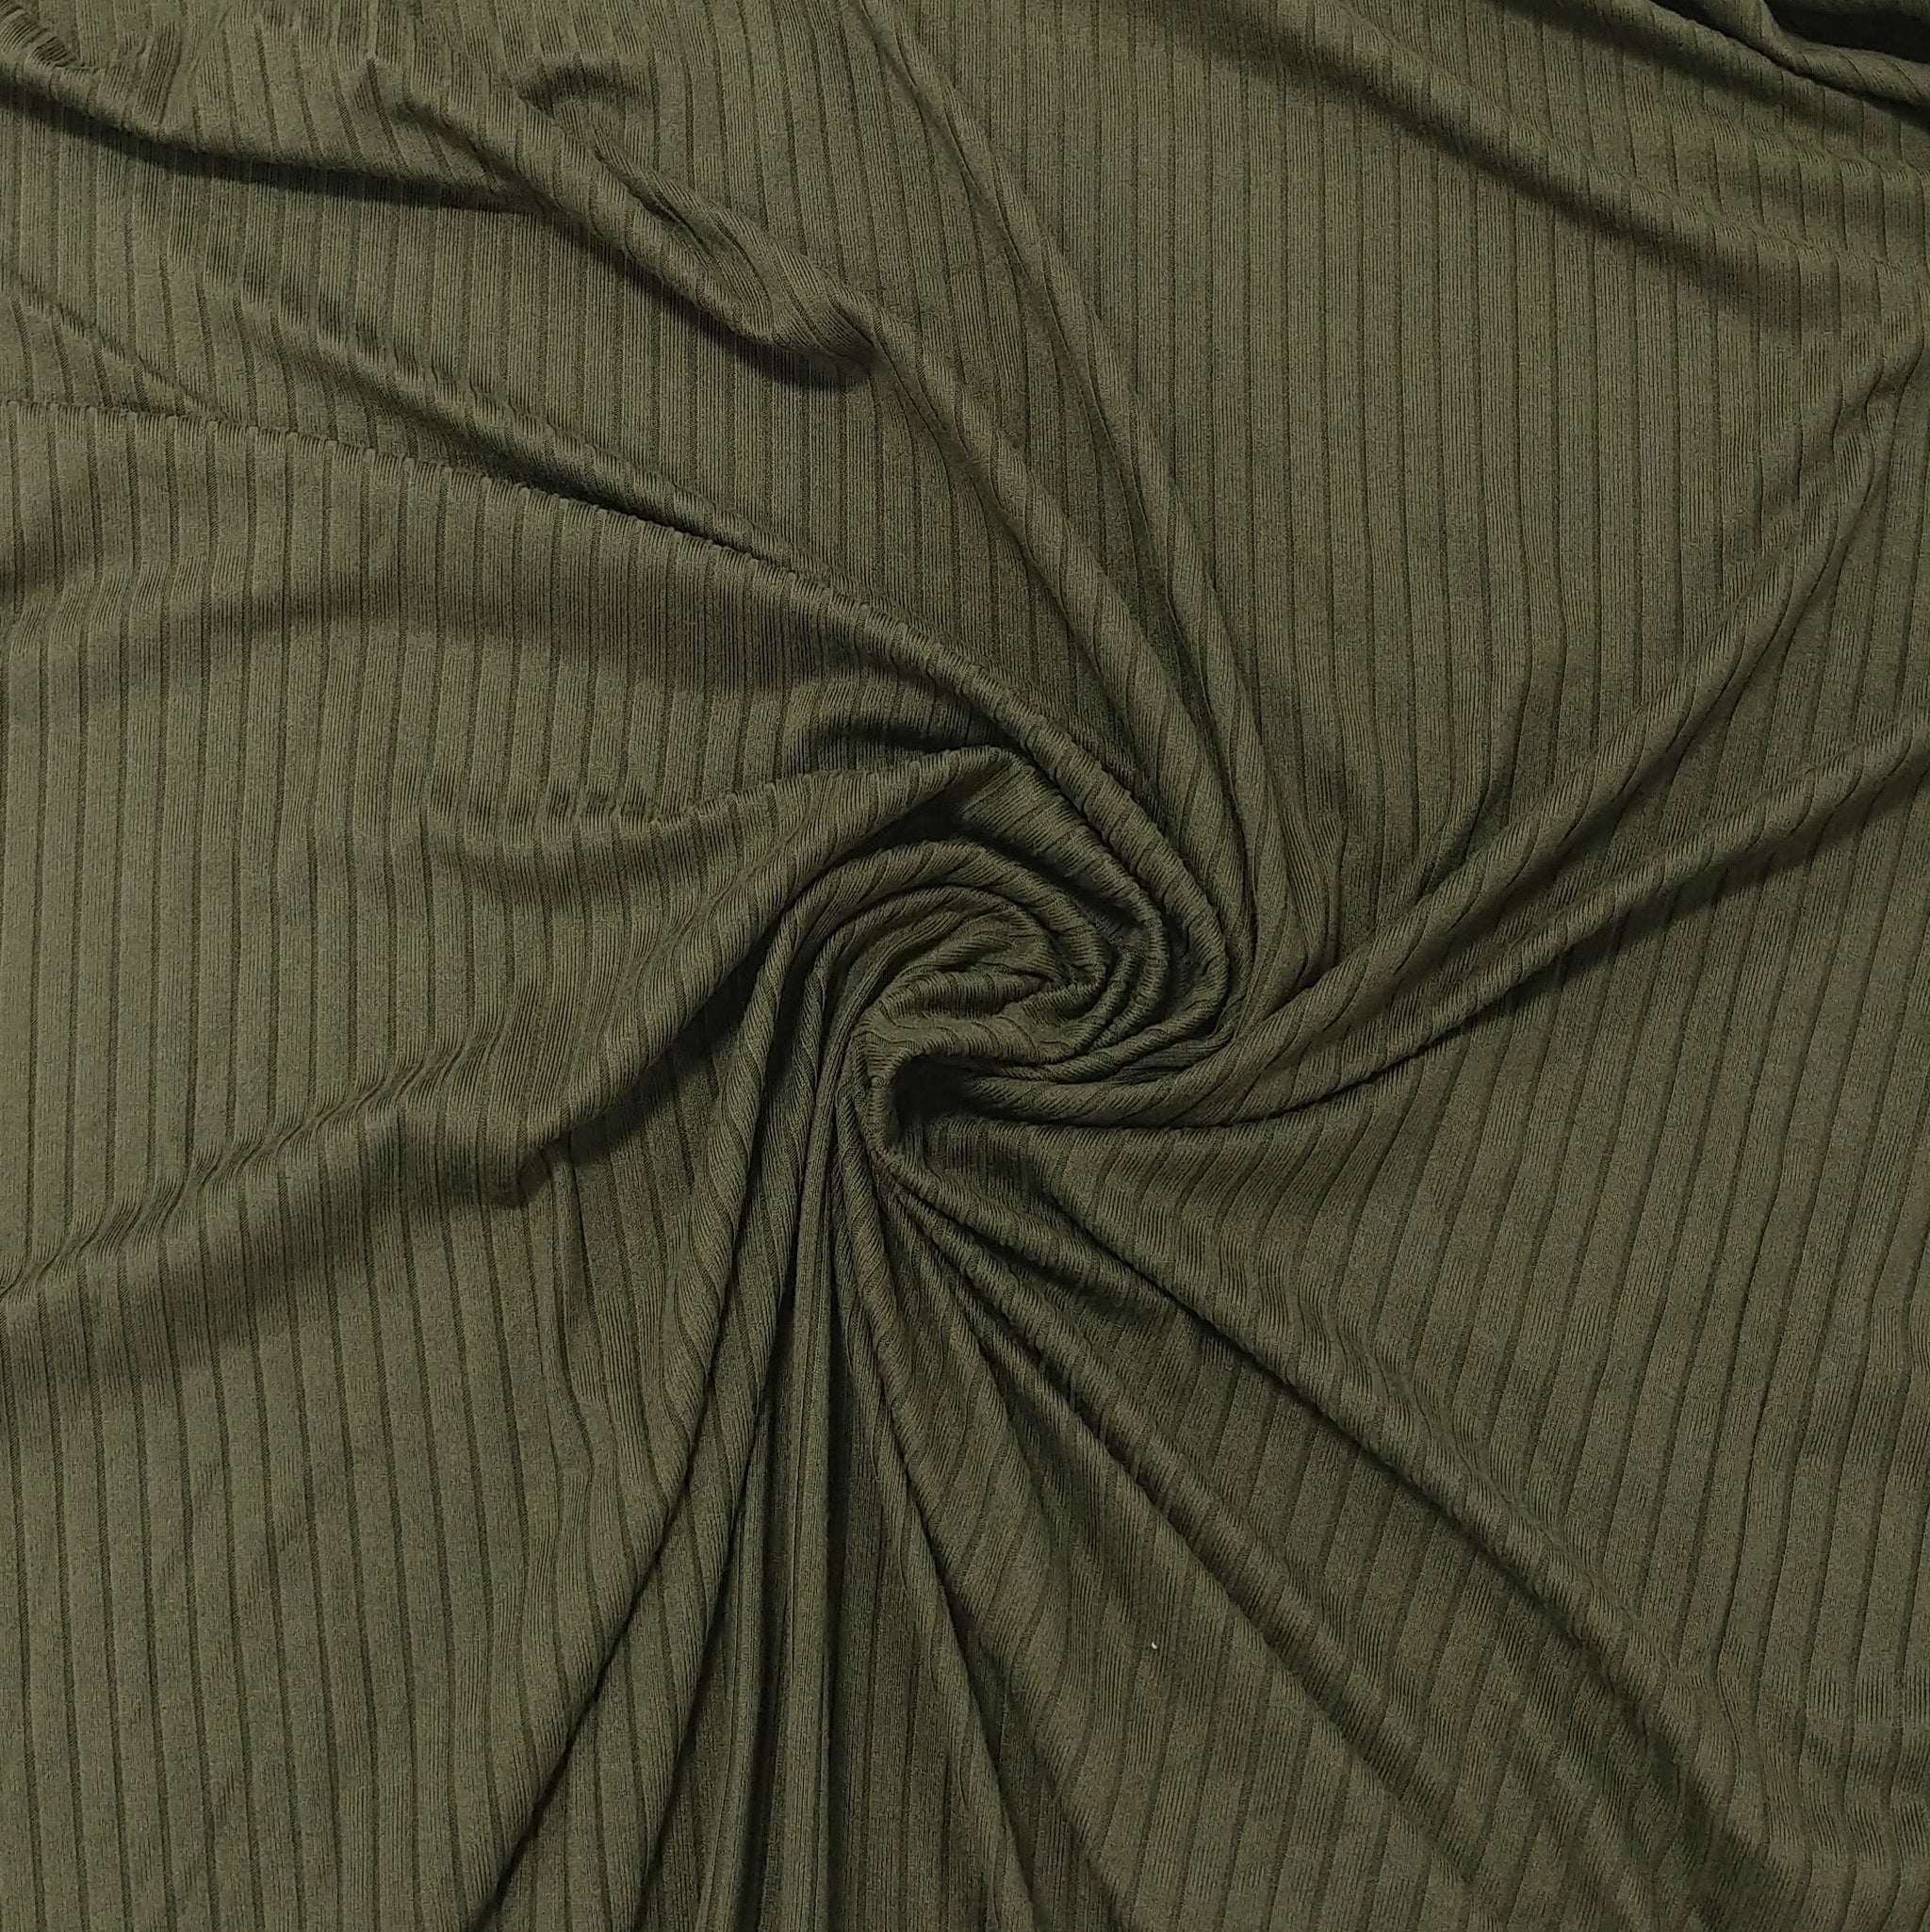 Army Green Solid Cotton Spandex Knit Fabric  Cotton spandex, Cotton lycra  fabric, Knitted fabric